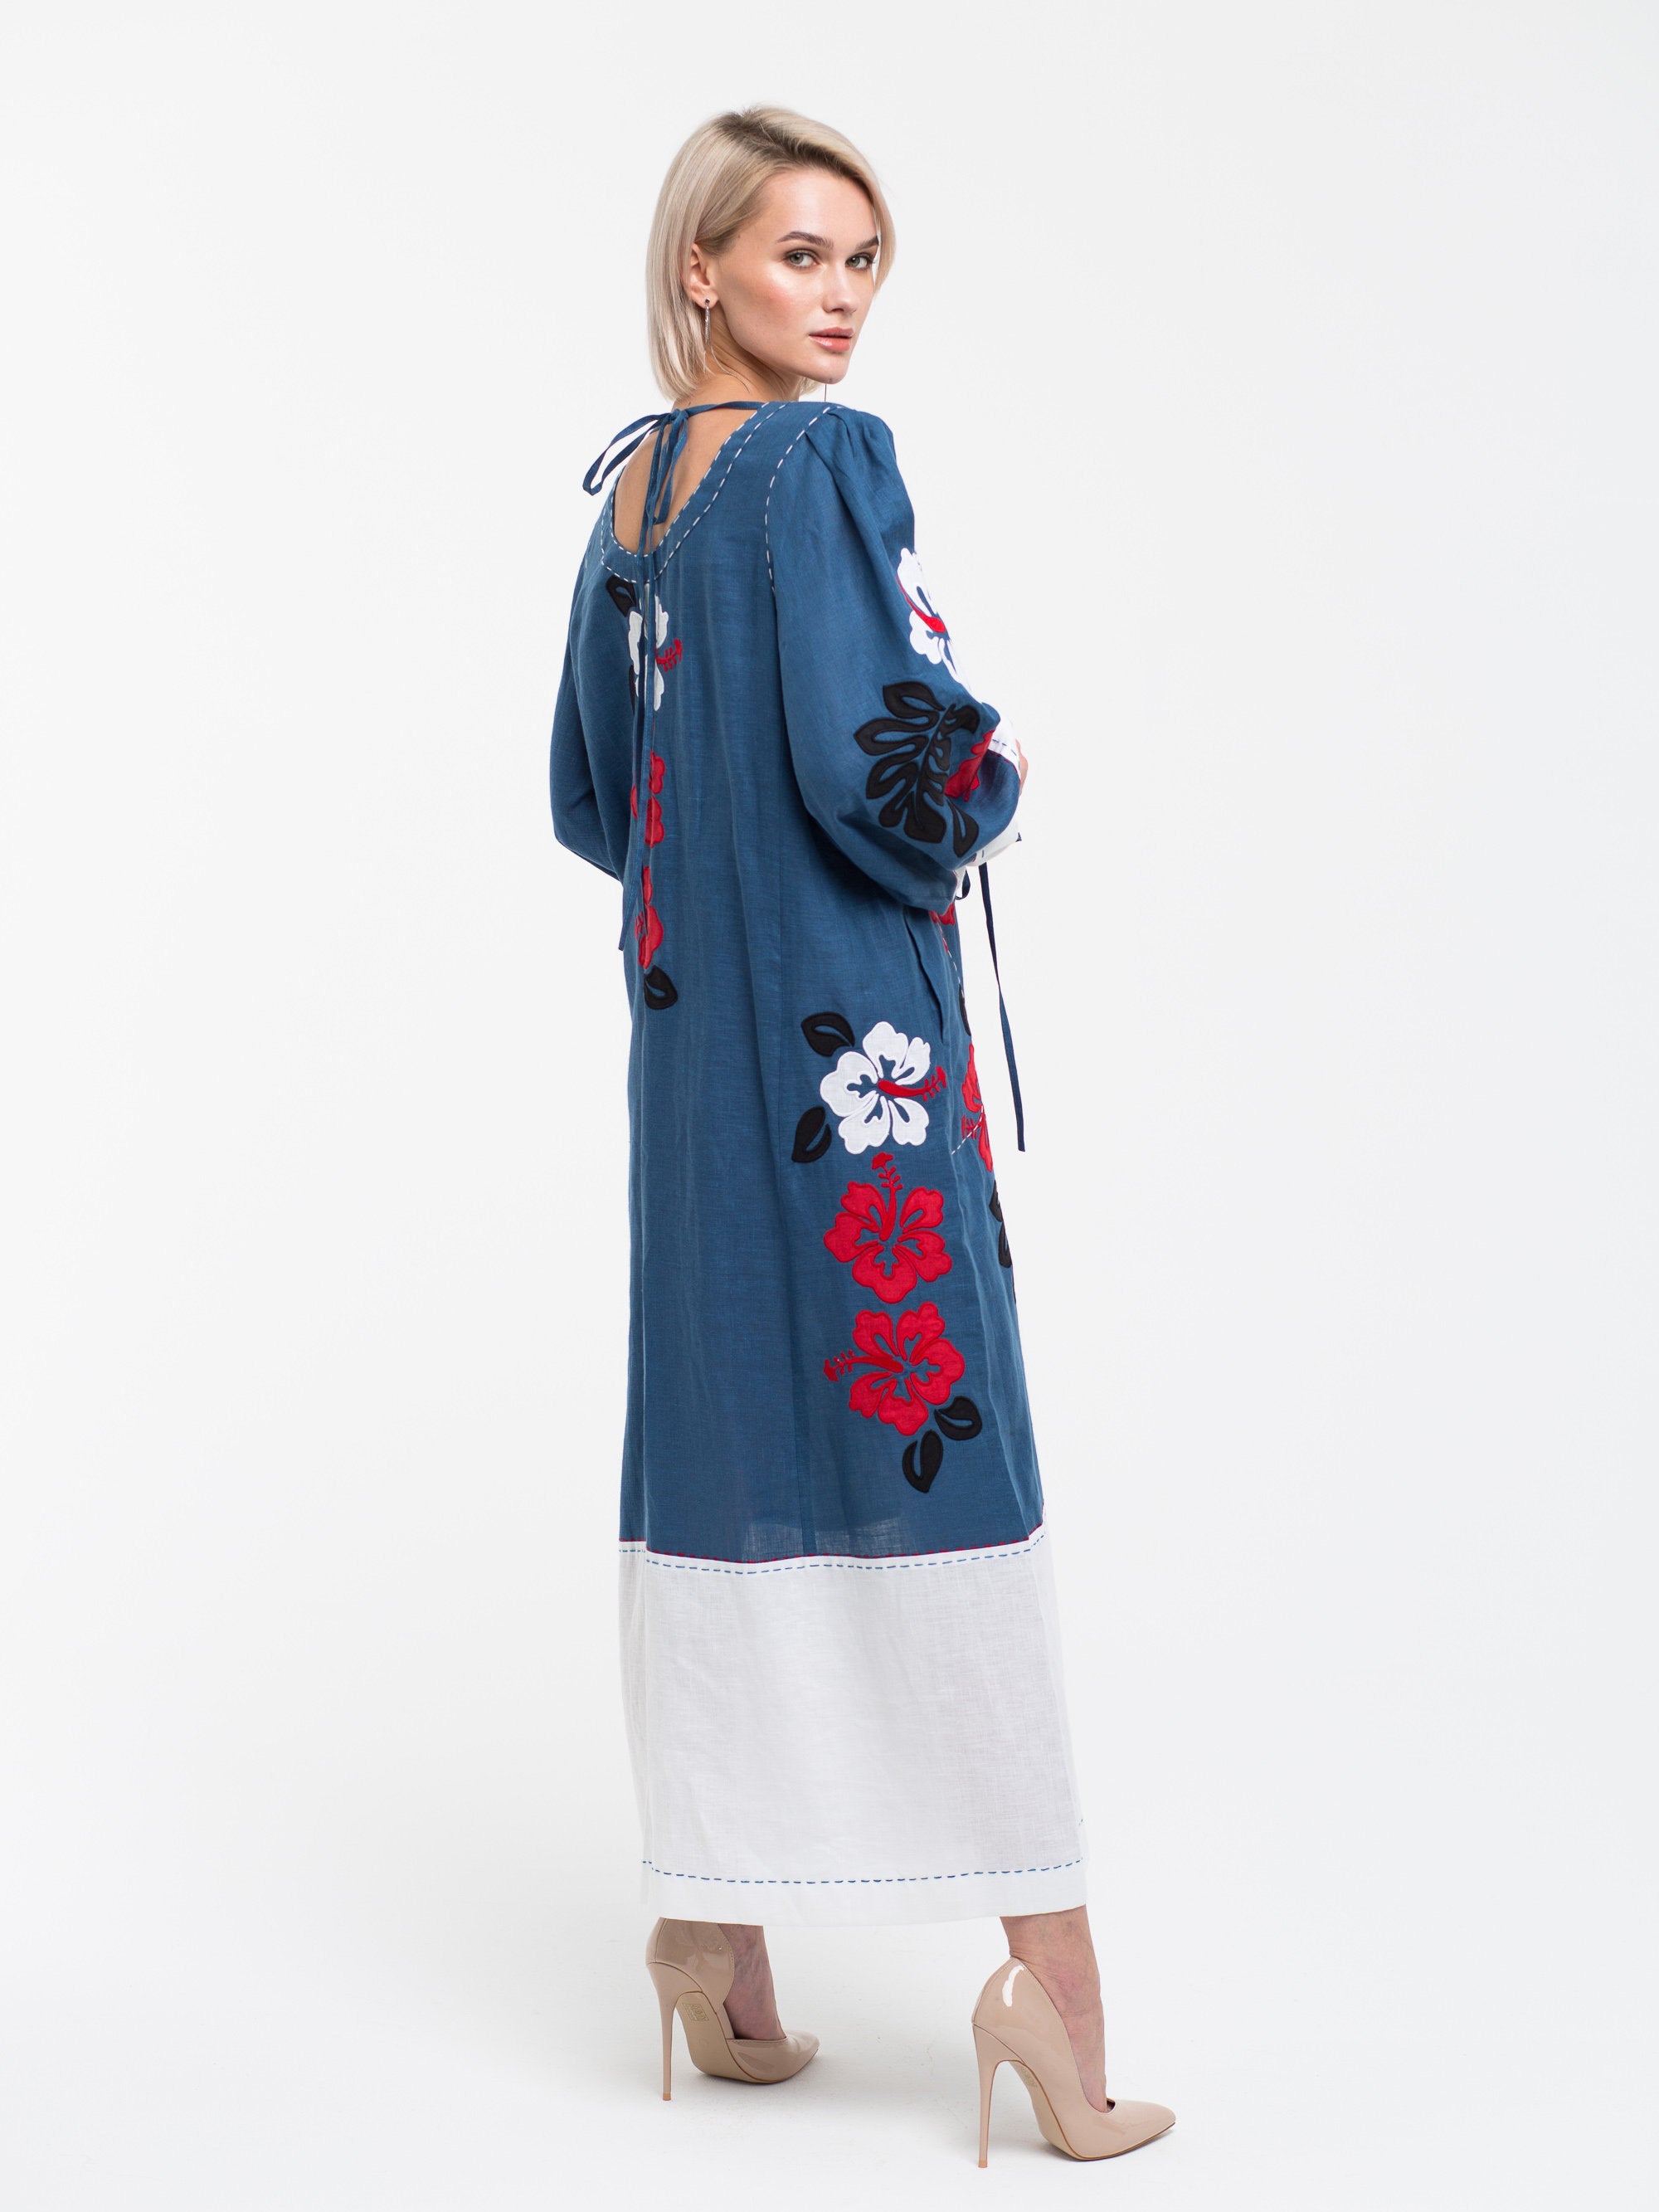 Hawaii embroidered dress Applique linen kaftan with tie cuffs and V-back